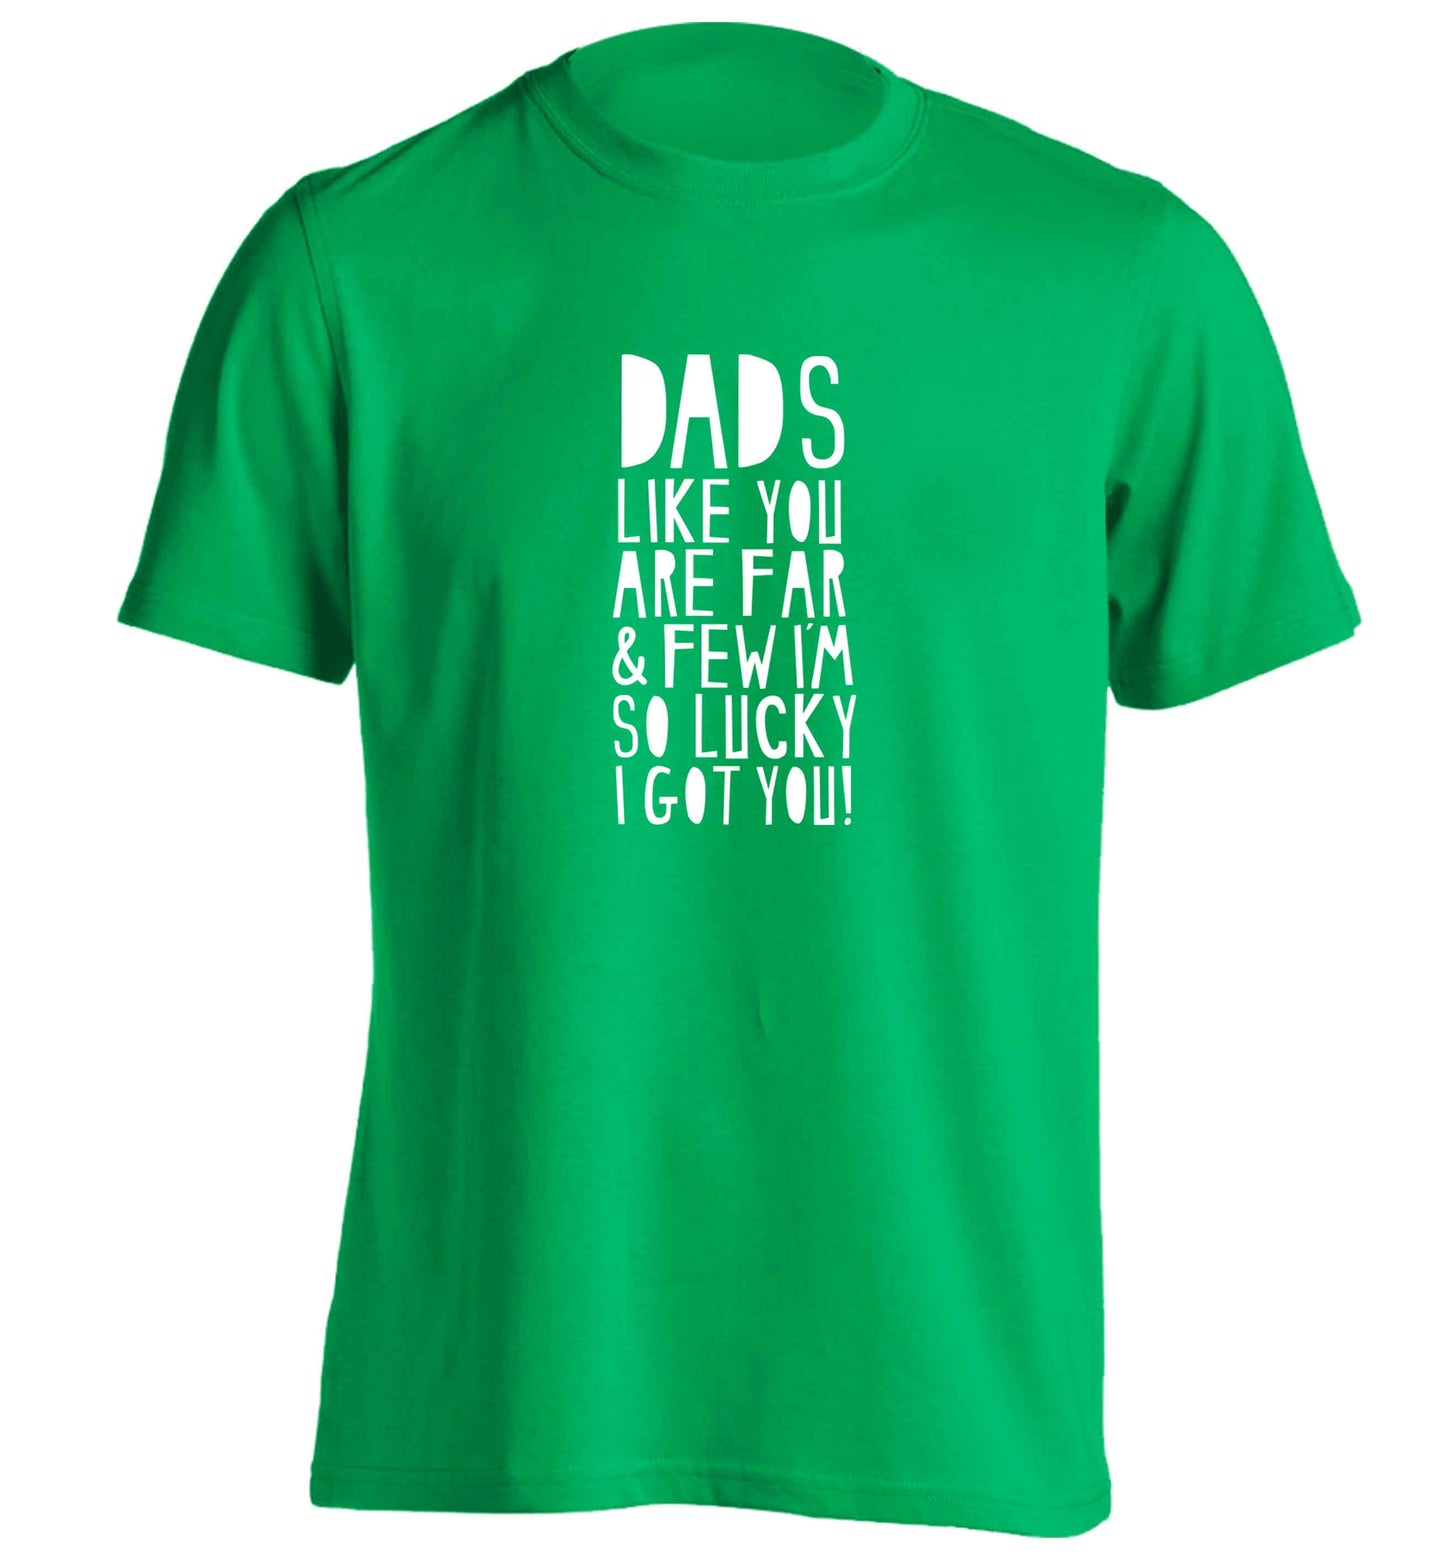 Dads like you are far and few I'm so luck I got you! adults unisex green Tshirt 2XL